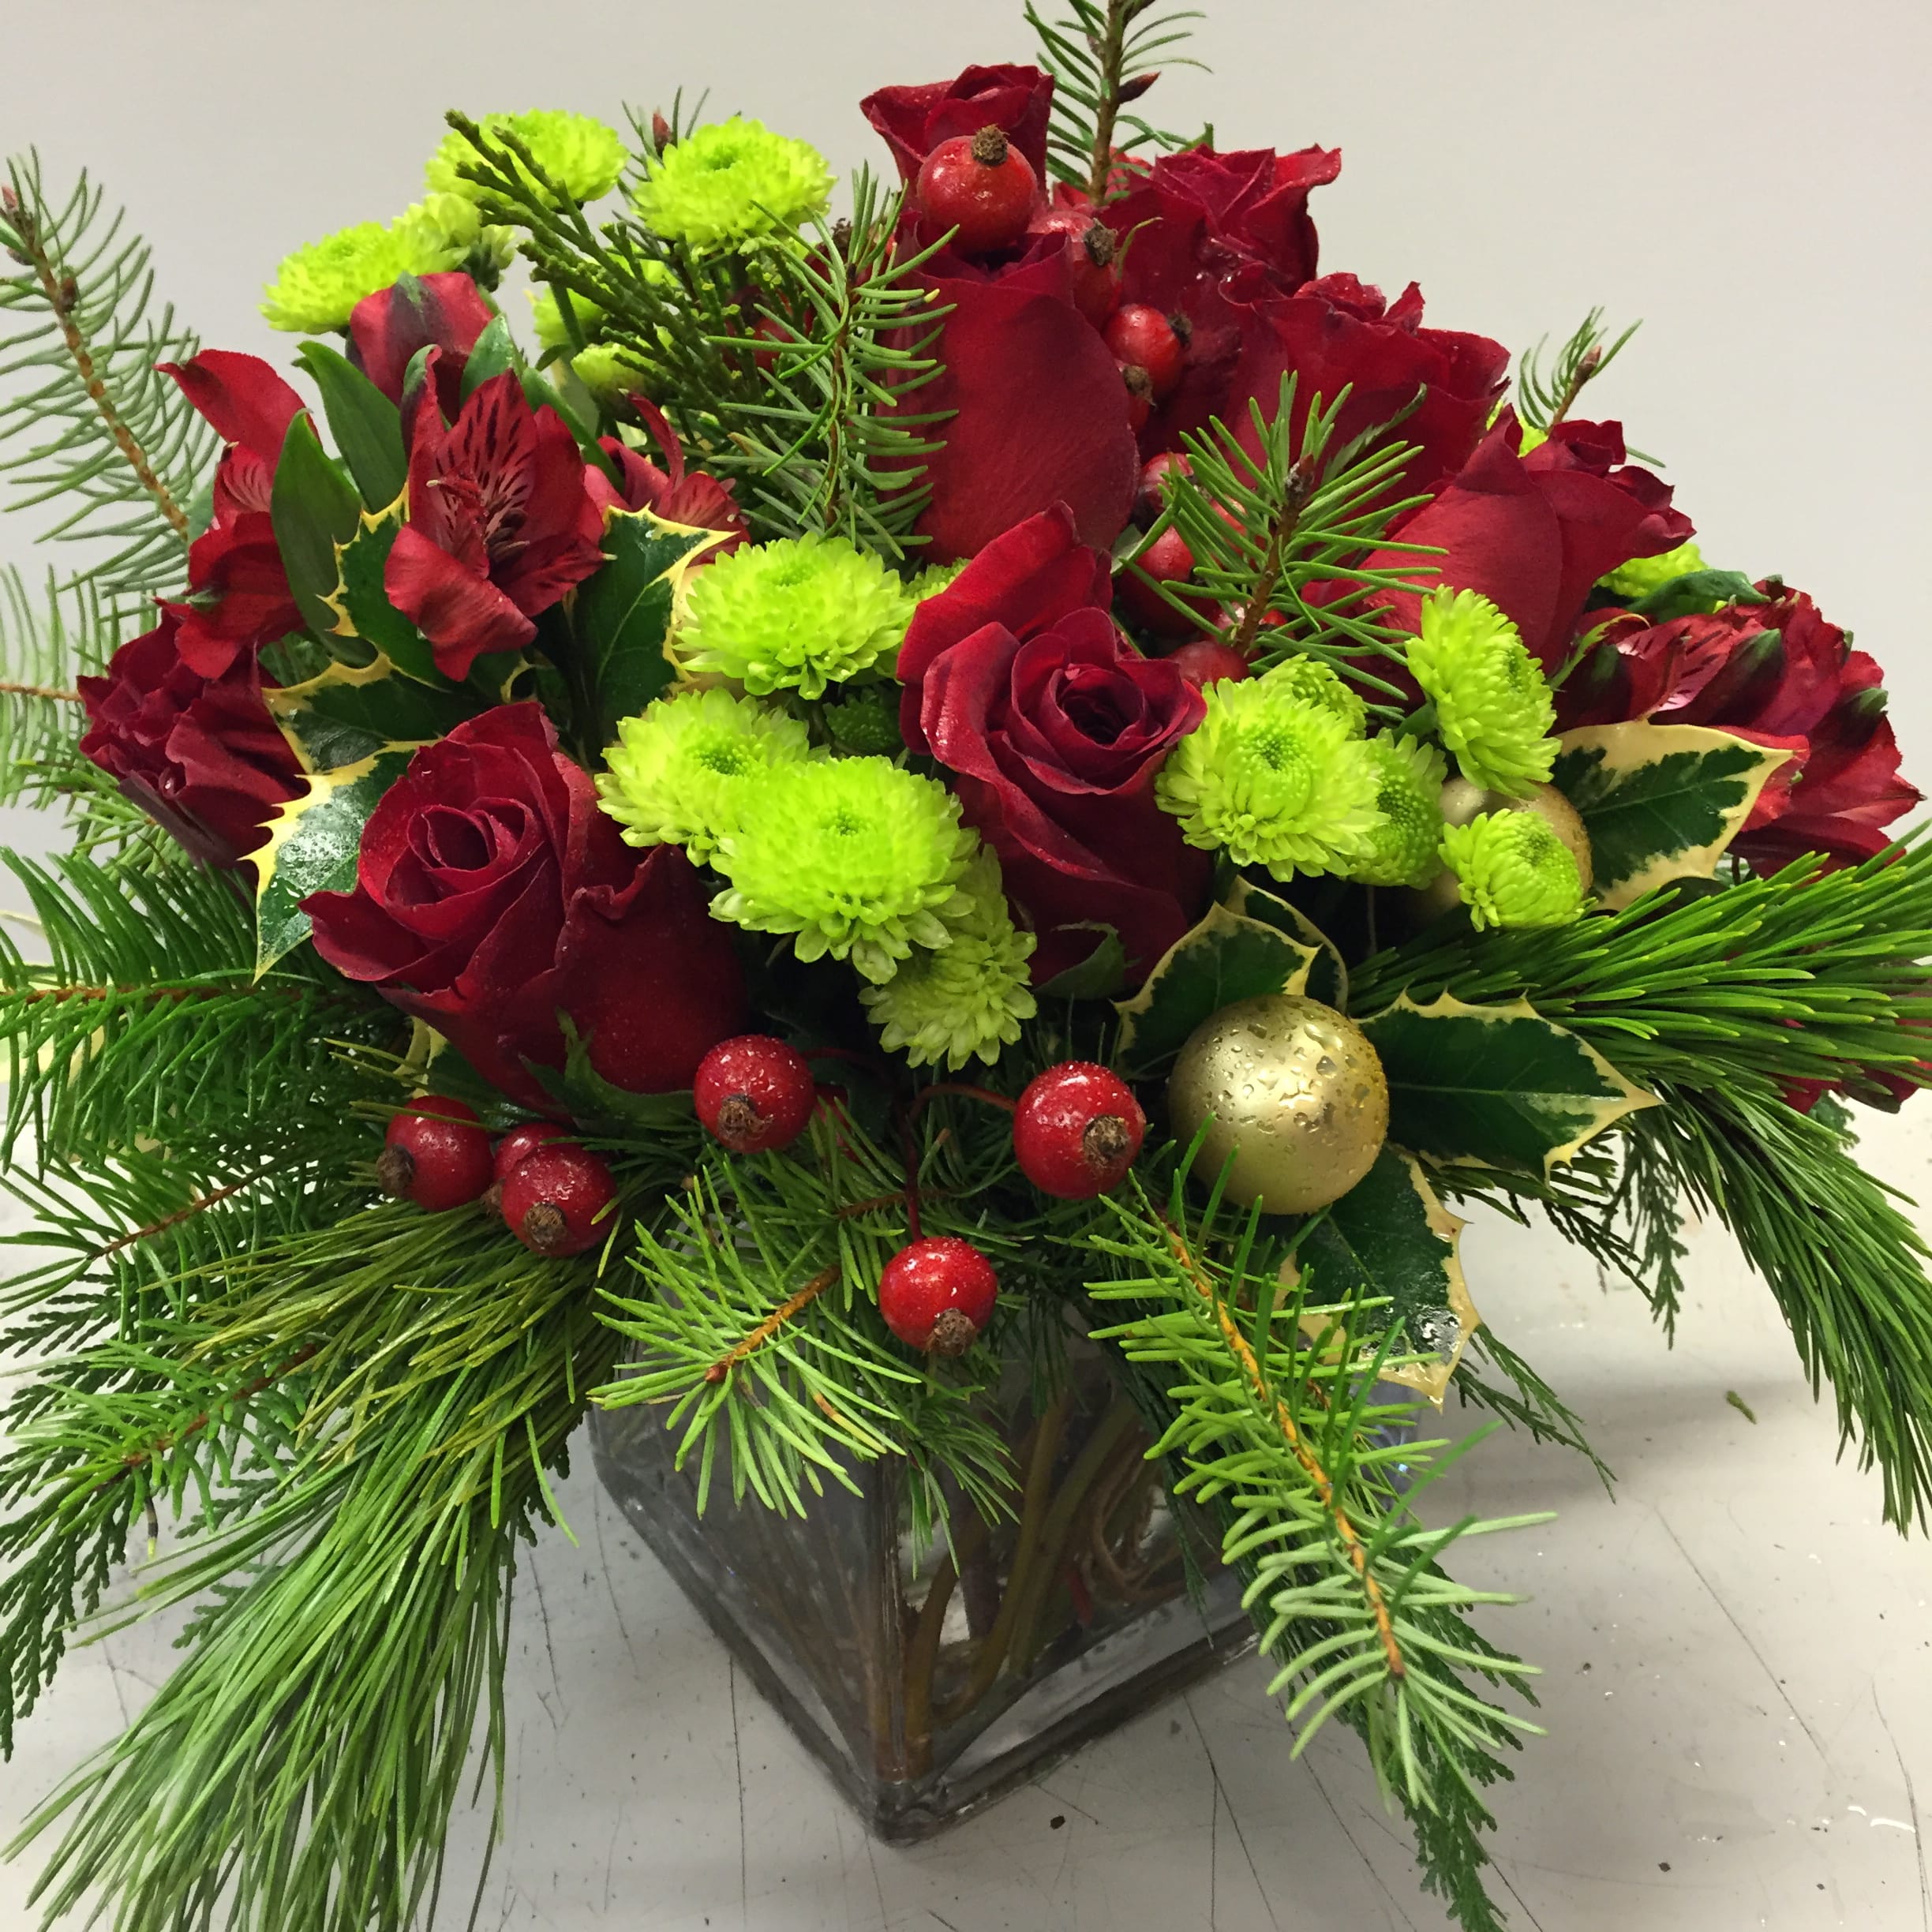 Merry &amp; Bright - A low glass vase in a Christmas theme with red roses, Christmas evergreen, mini holiday ornaments and accents.     